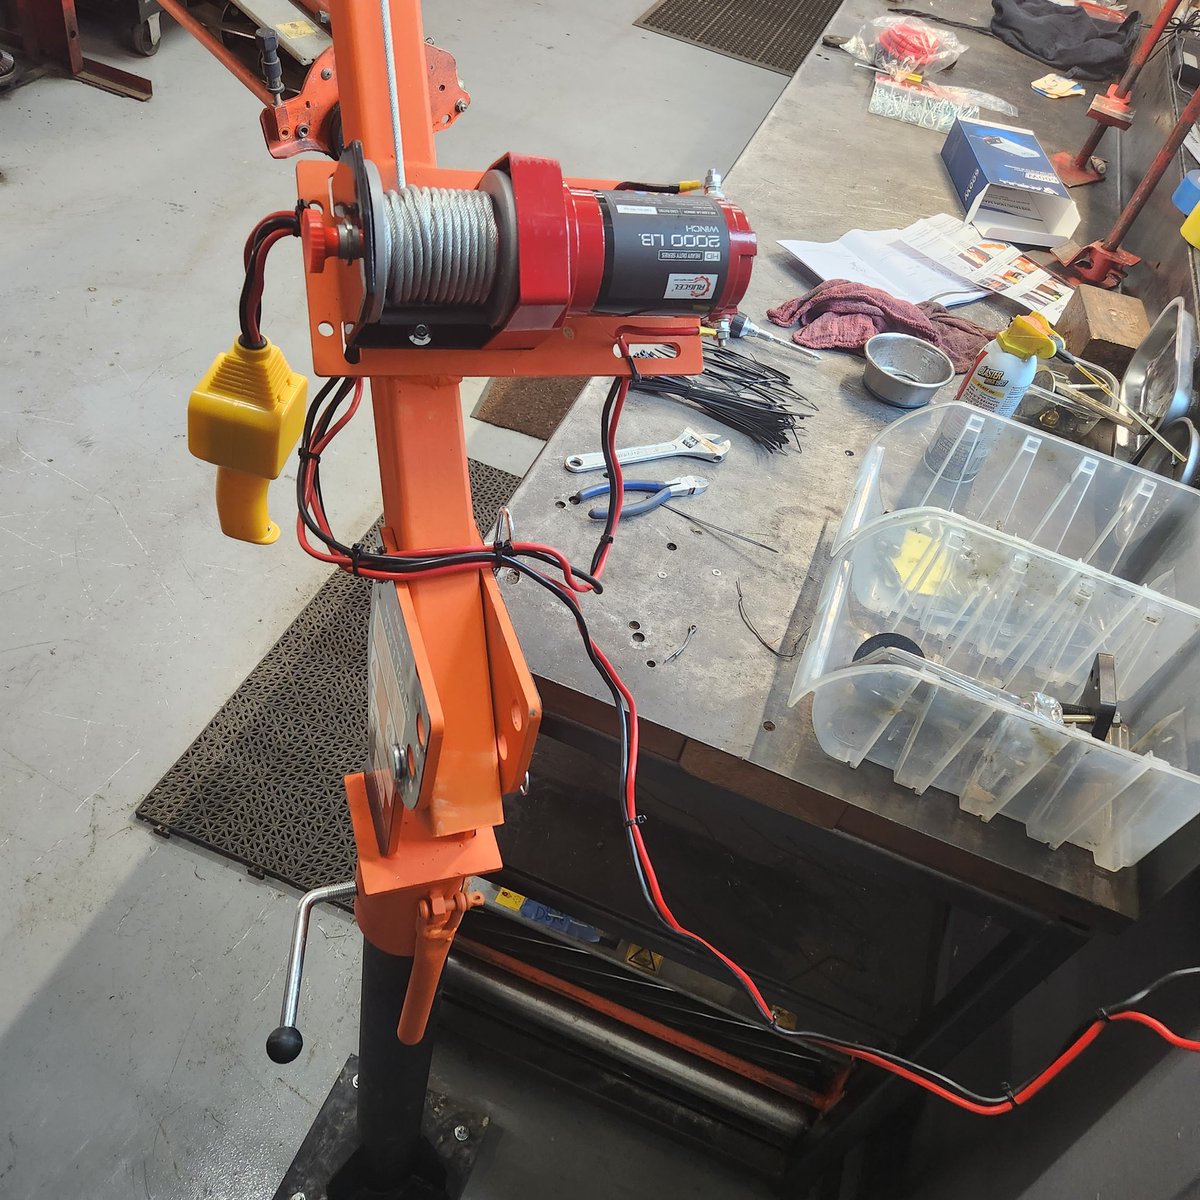 I installed this 12 volt winch today so that our Reel Time workers don't have to lift the cutting reels from the ground to the bench anymore, with their backs. I bought a truck bed winch and post, and a 120 v AC to 12 v DC converter. #efficiency #equipmentmanagement #reeltimework